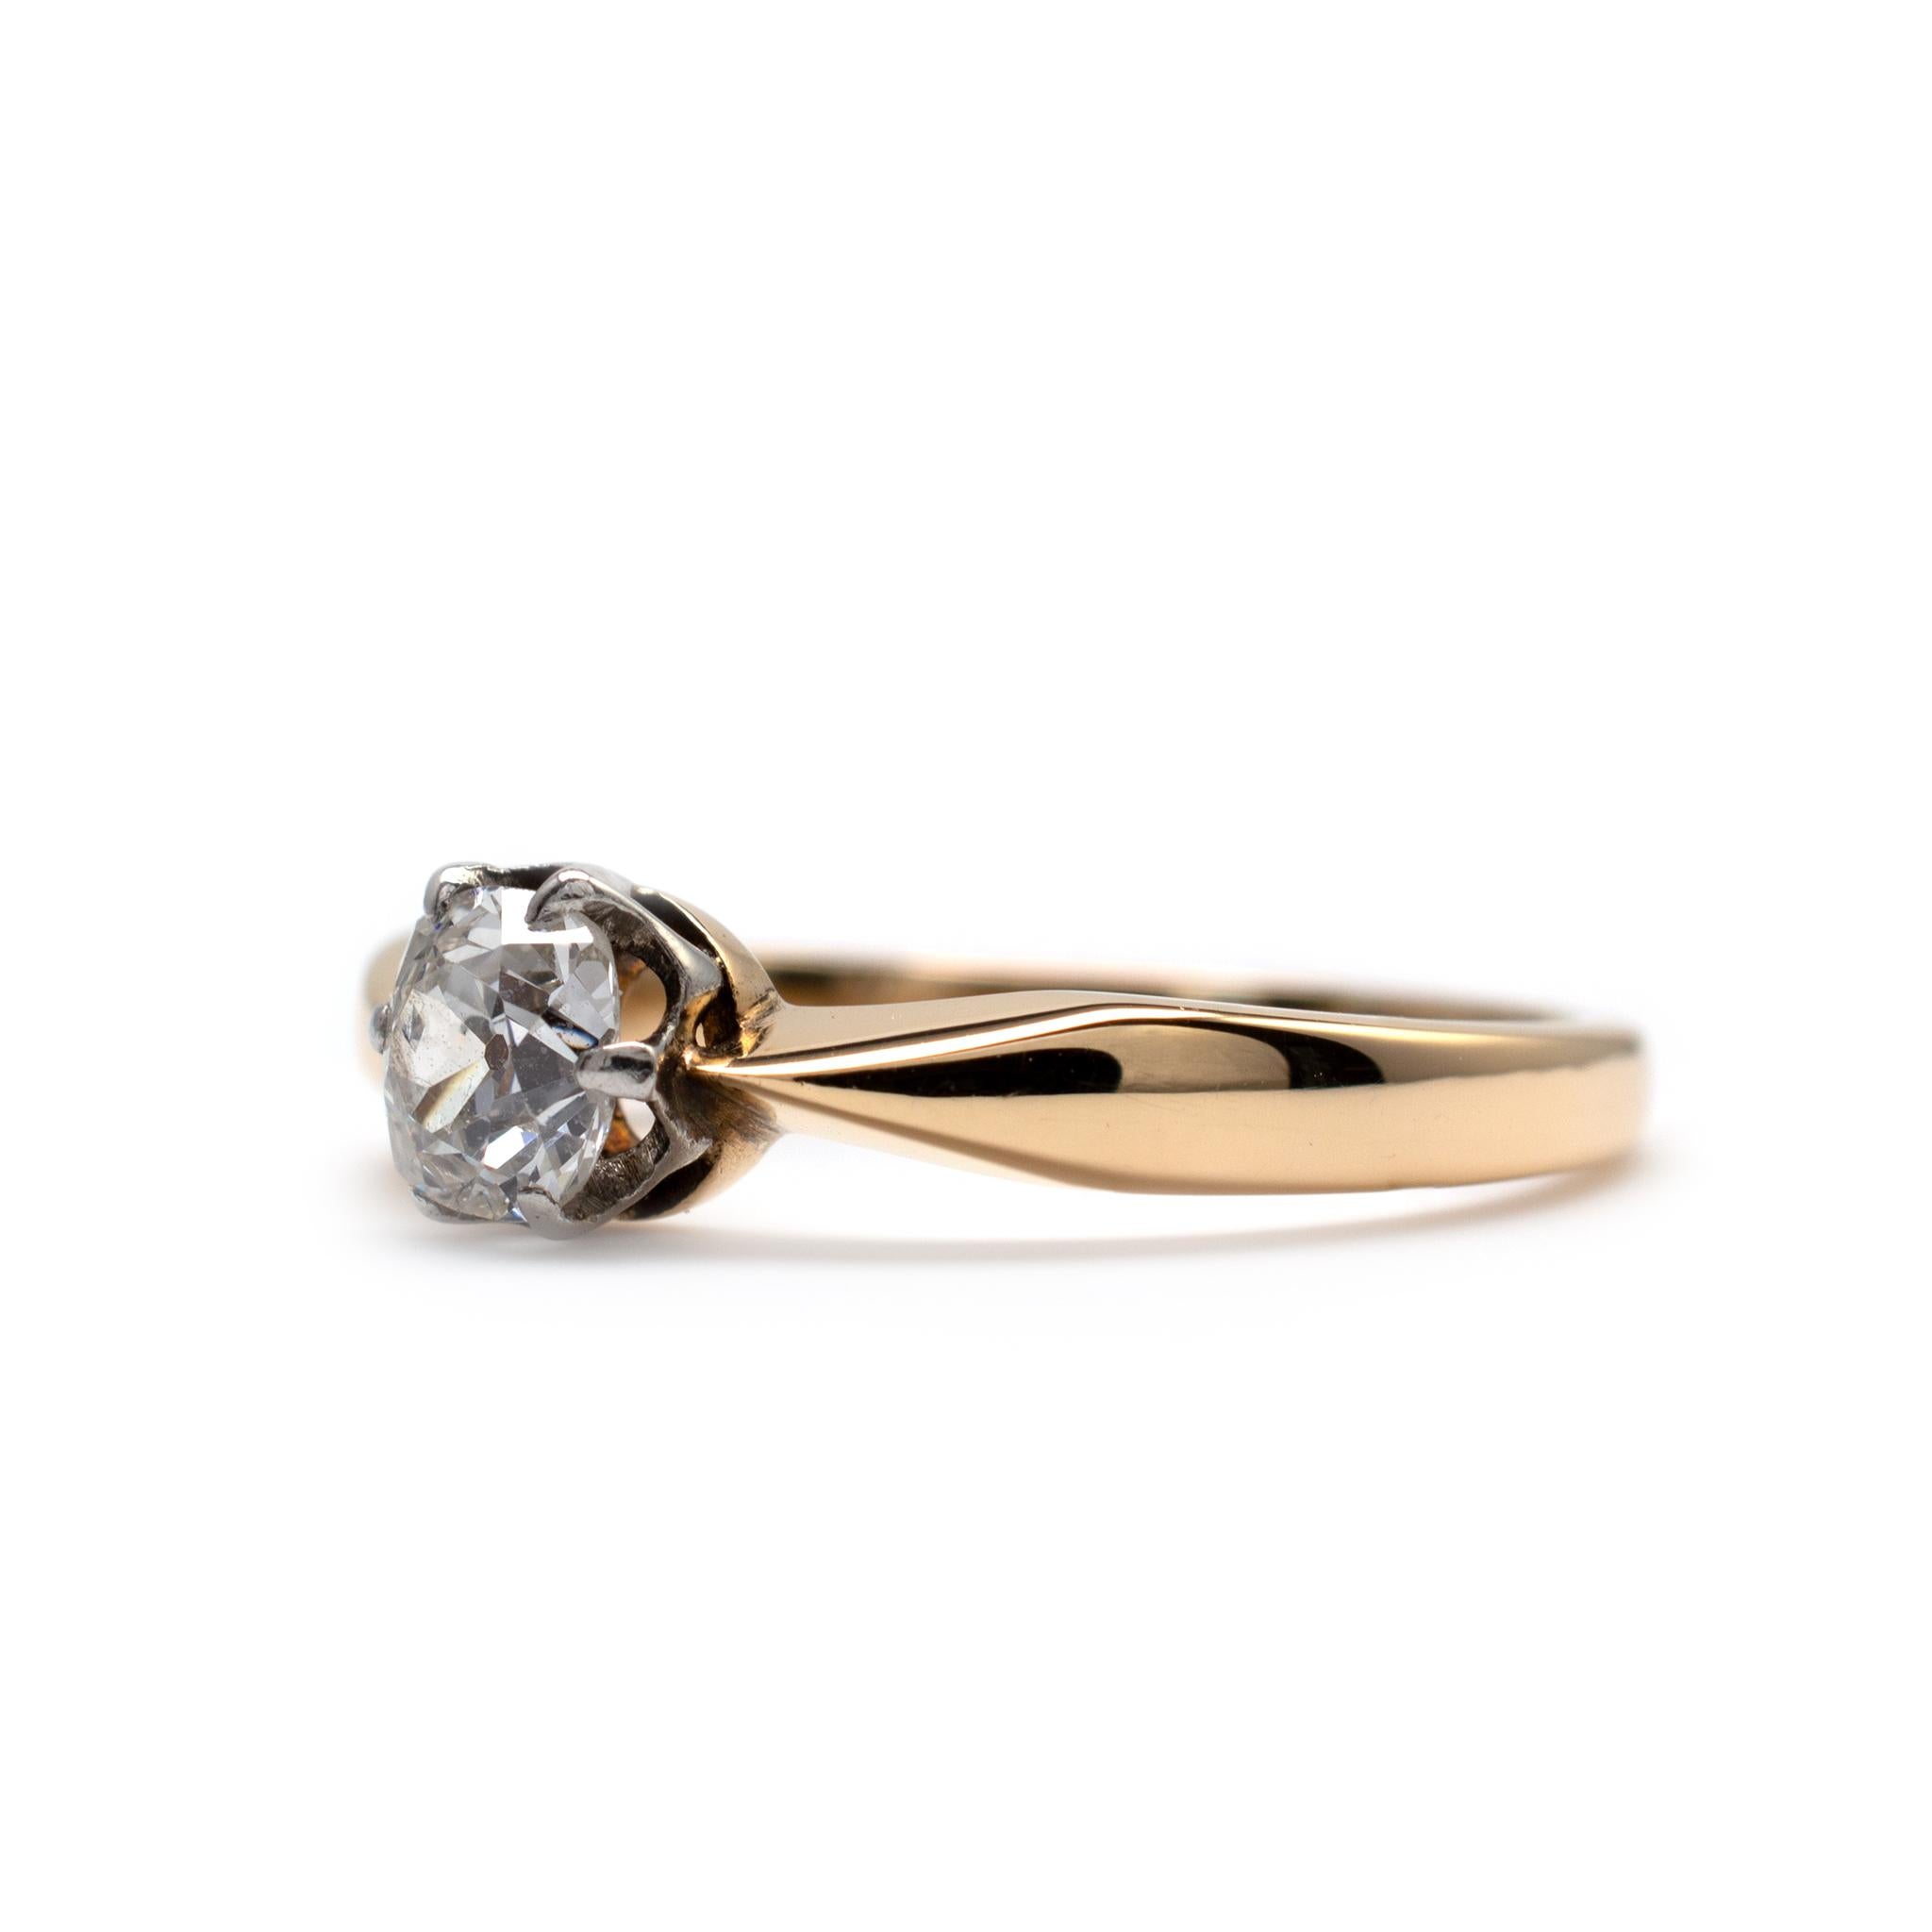 A quality diamond solitaire ring with old cushion cut 0.50-carat diamond, crafted in 18ct yellow gold.

The thick shank has beveled edges with pinched reverse tapered shoulders. The diamond is neatly secured into a decorative rex style setting. A